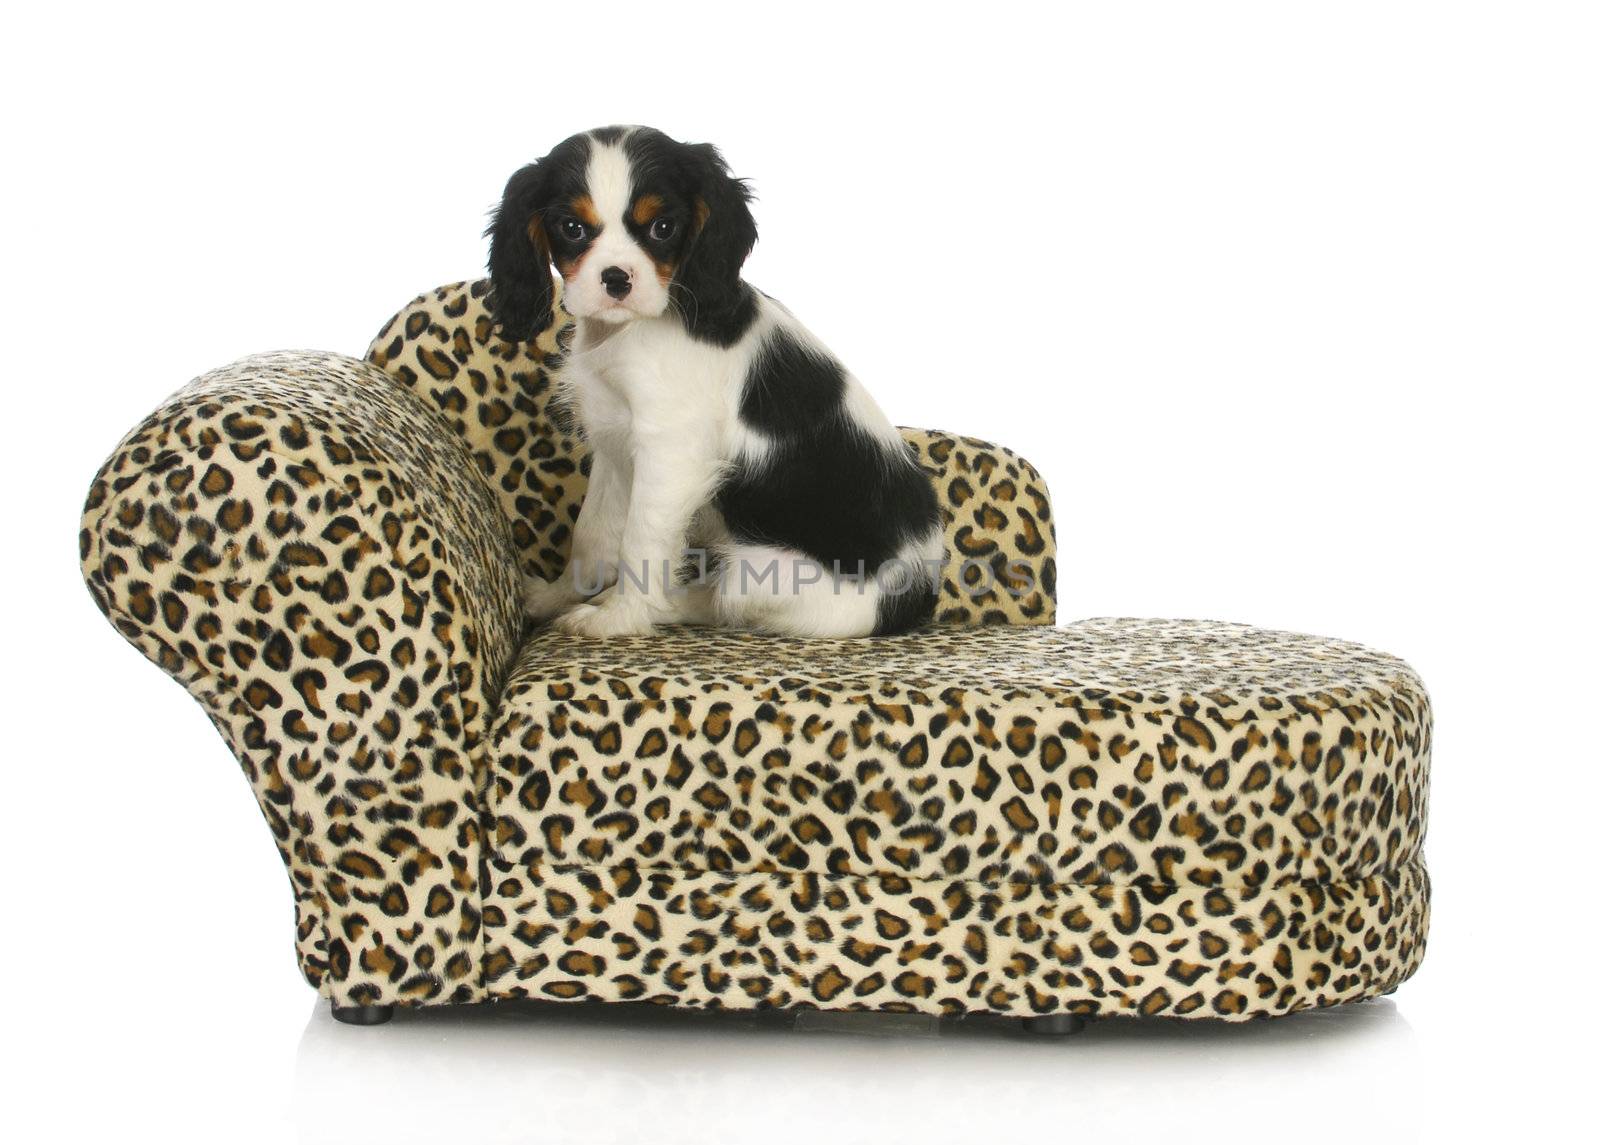 dog sitting on a dog bed - cavalier king charles spaniel sitting on a dog bed isolated on white background